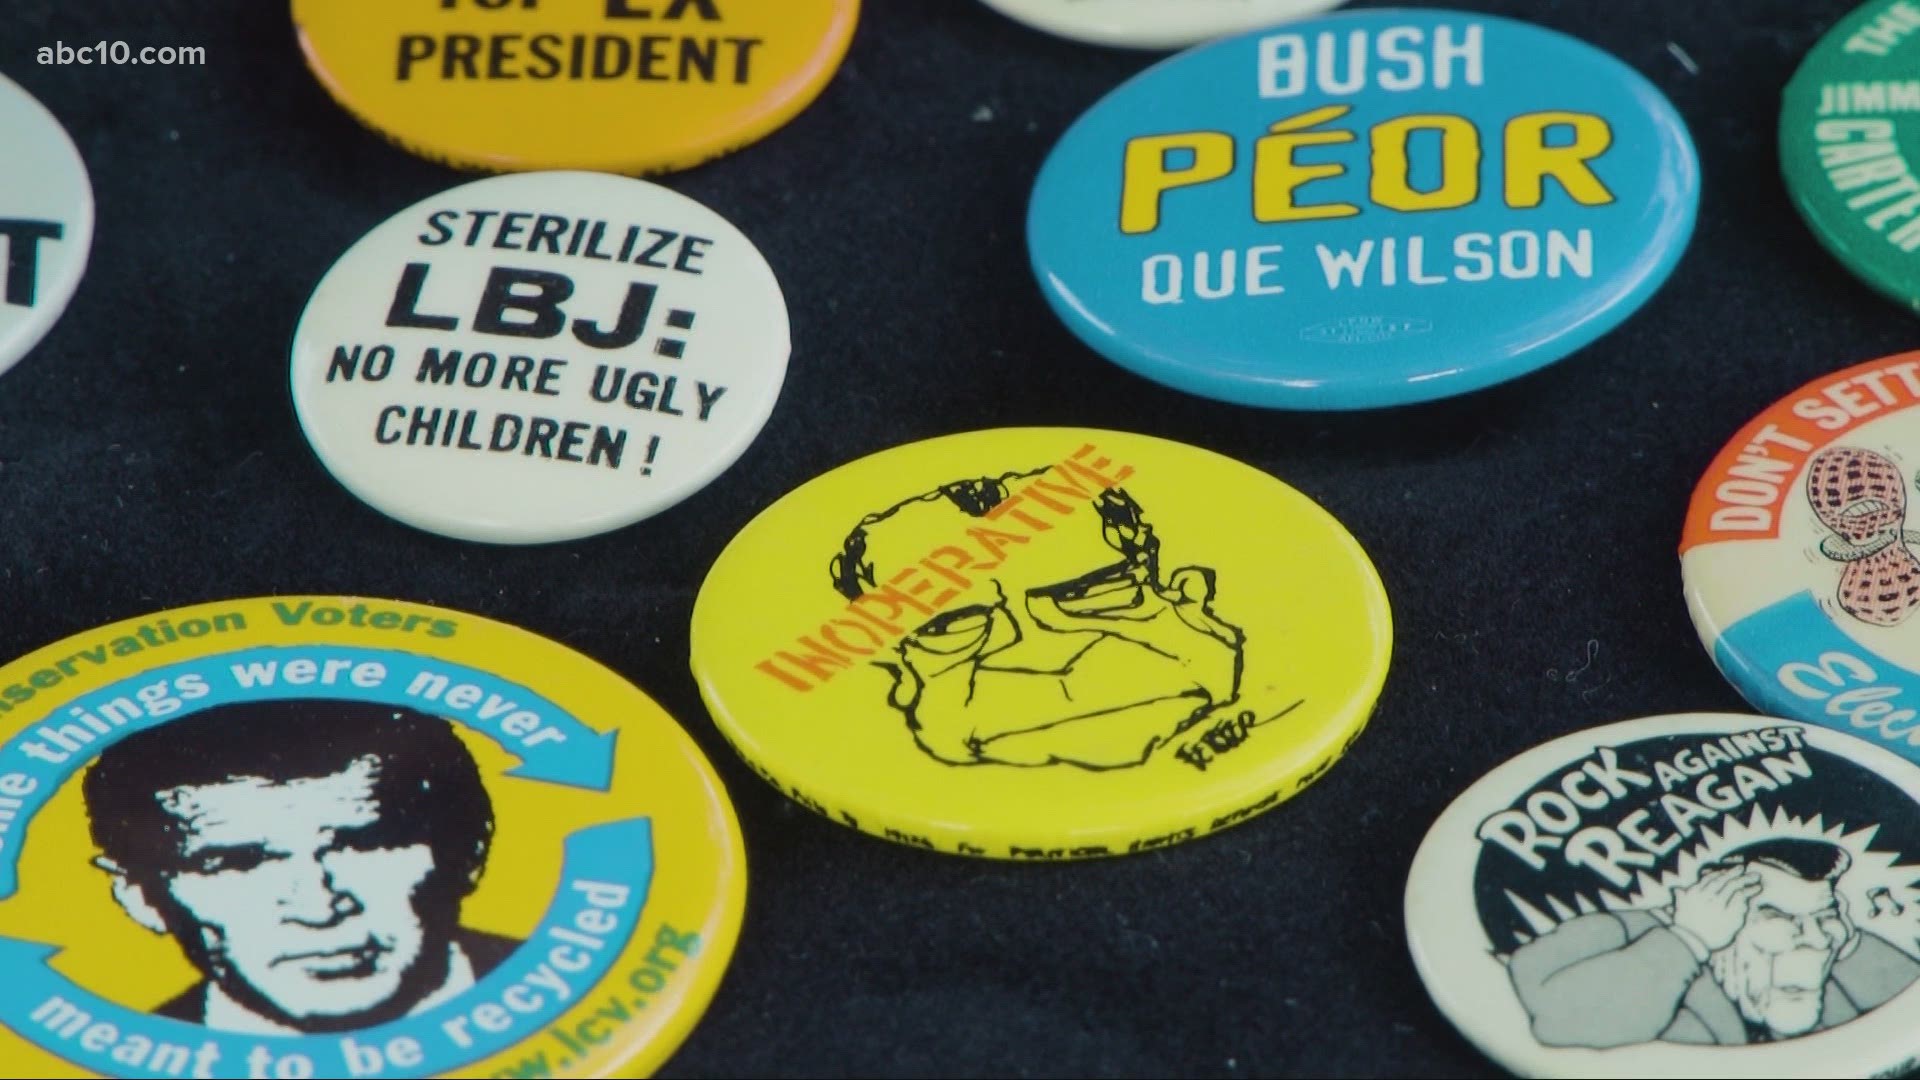 For more than 40 years, Davis resident Adam Gottlieb has collected election buttons and memorabilia of all kinds.